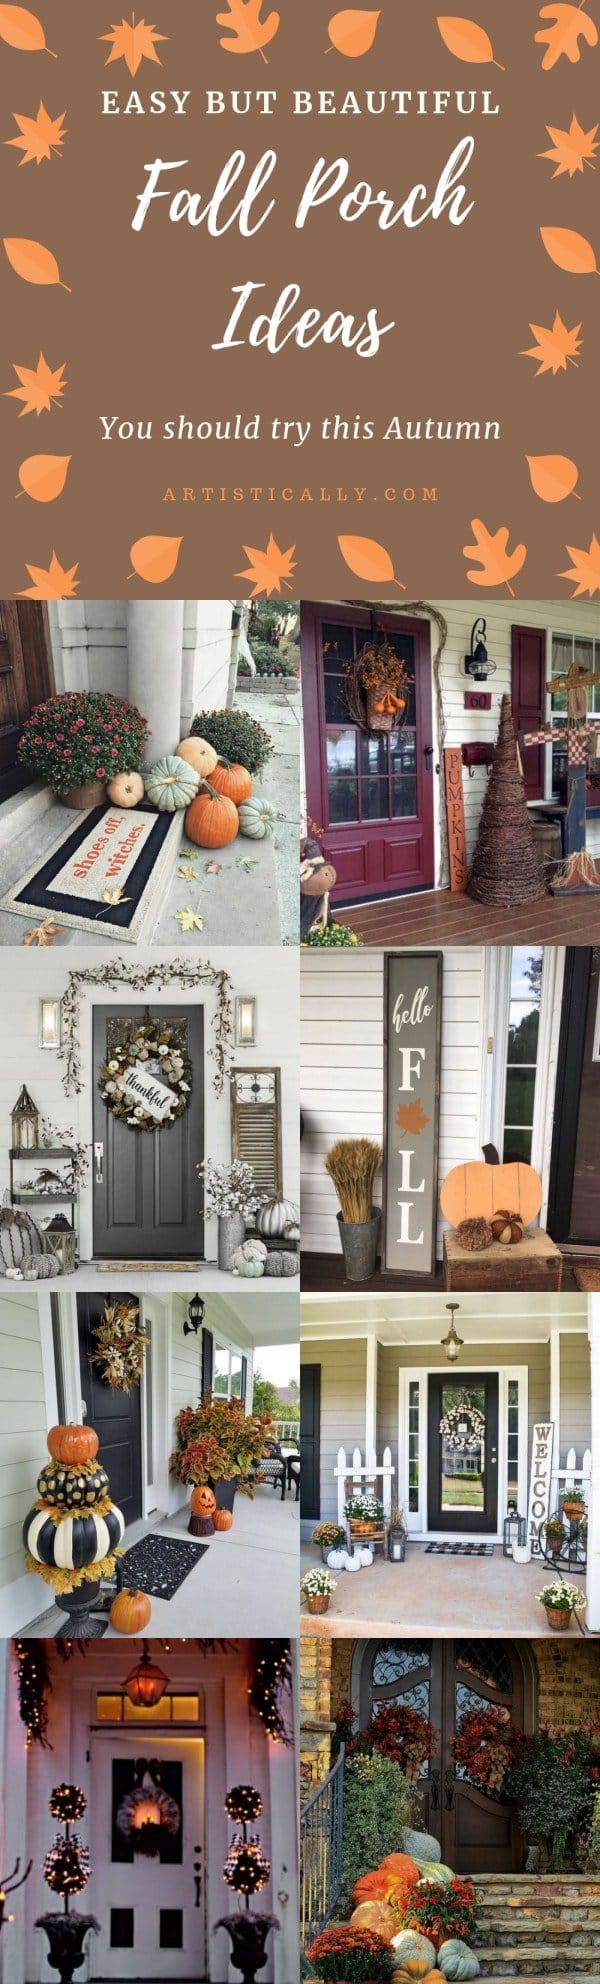  Easy-but-Beautiful-Fall-Porch-Ideas-You-should-try-this-Autumn